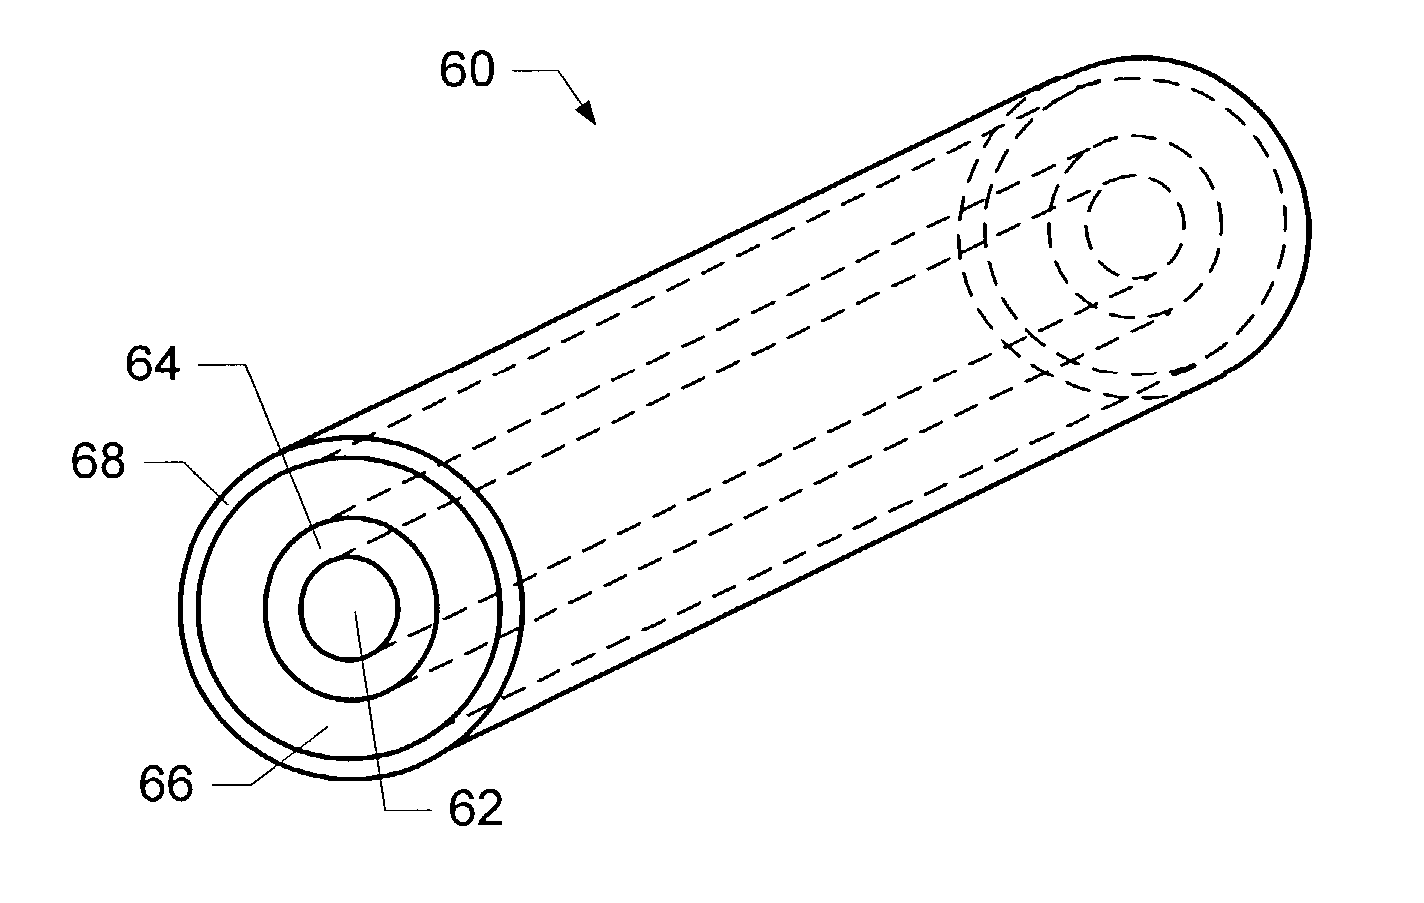 Fiber amplifier having a non-doped inner core and at least one doped gain region